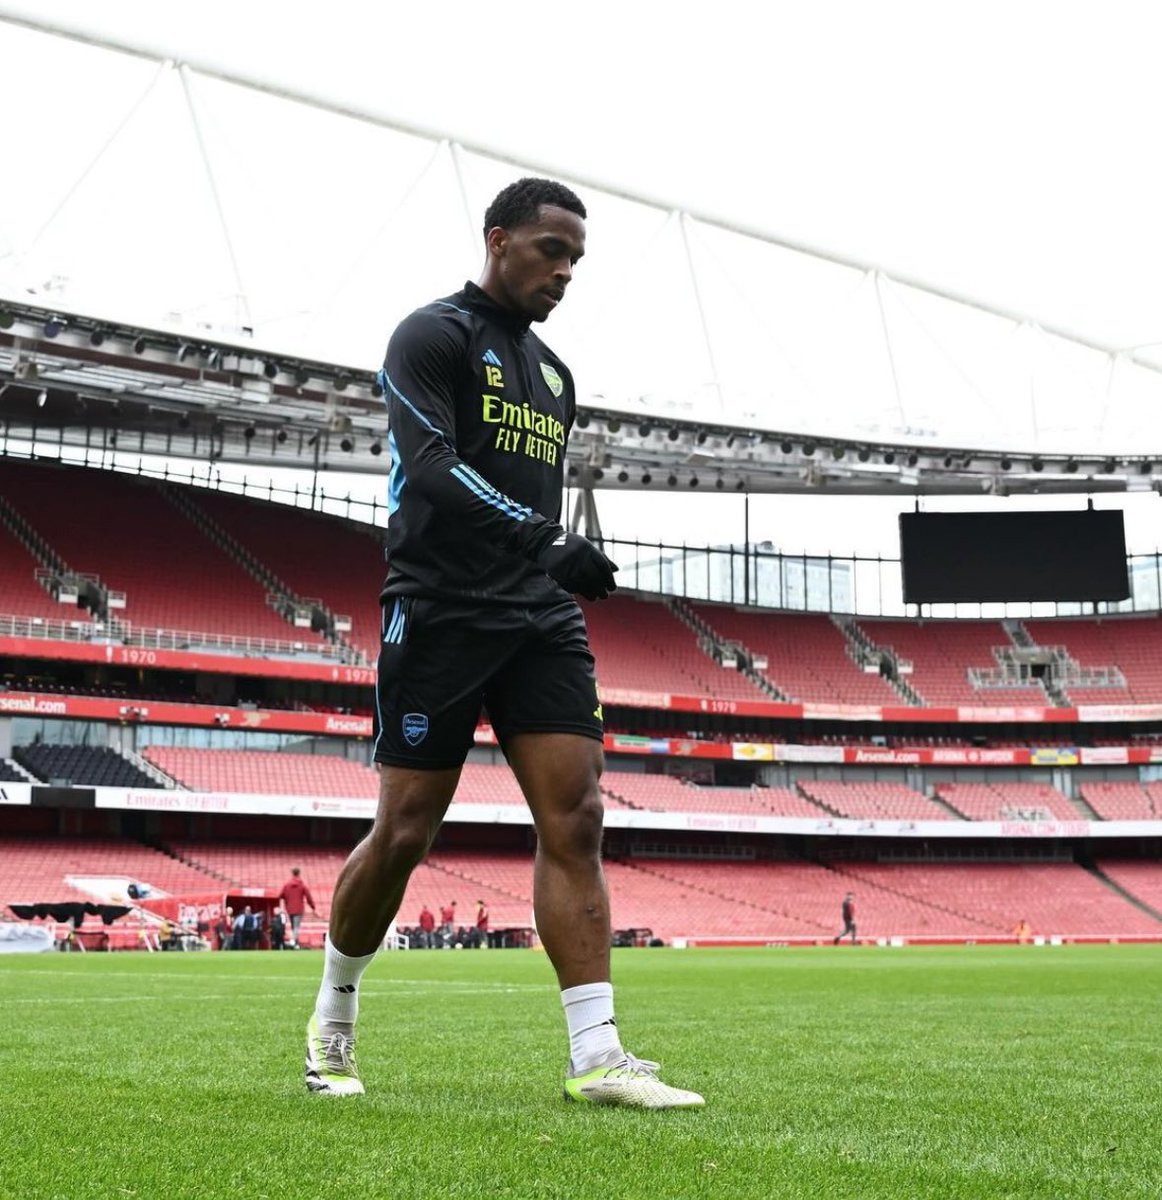 🔴⚪️ Arteta: “Jurrien Timber looks really good in training. It’s too soon for him to play but he will be tested again the U23s and then we see”. “I see him in right and left-fullback. We will use him in different ways”.